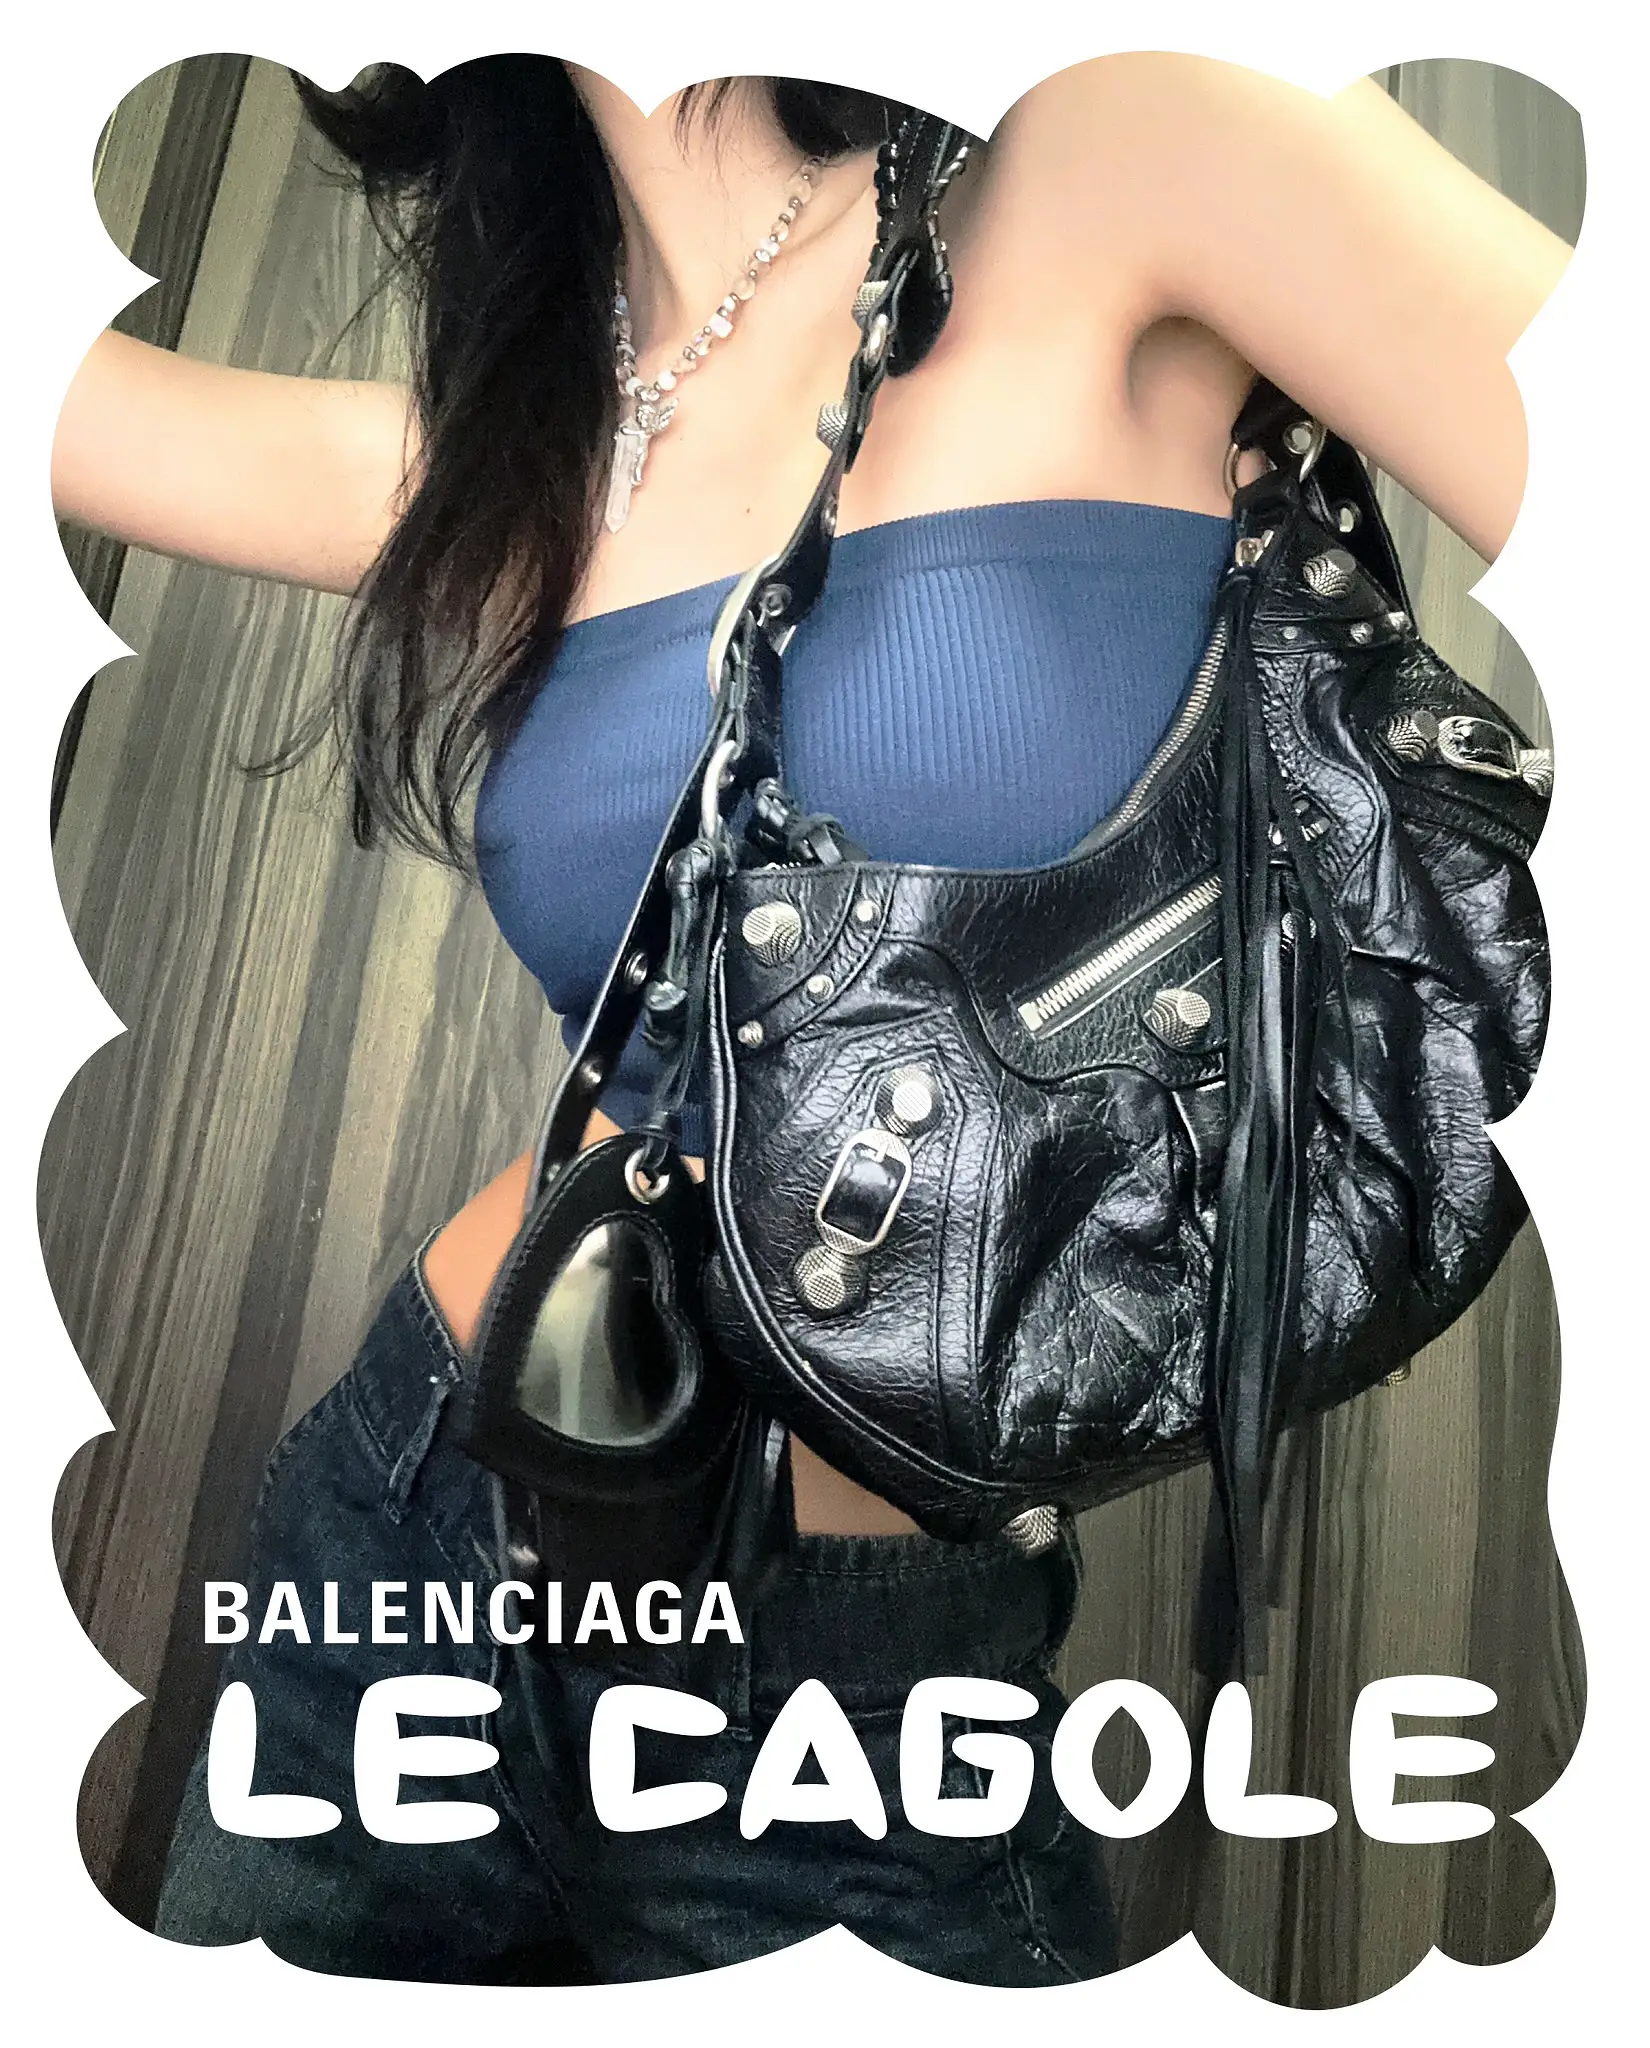 Worth the purchase? Balenciaga Le Cagole, Gallery posted by phhoebeliew